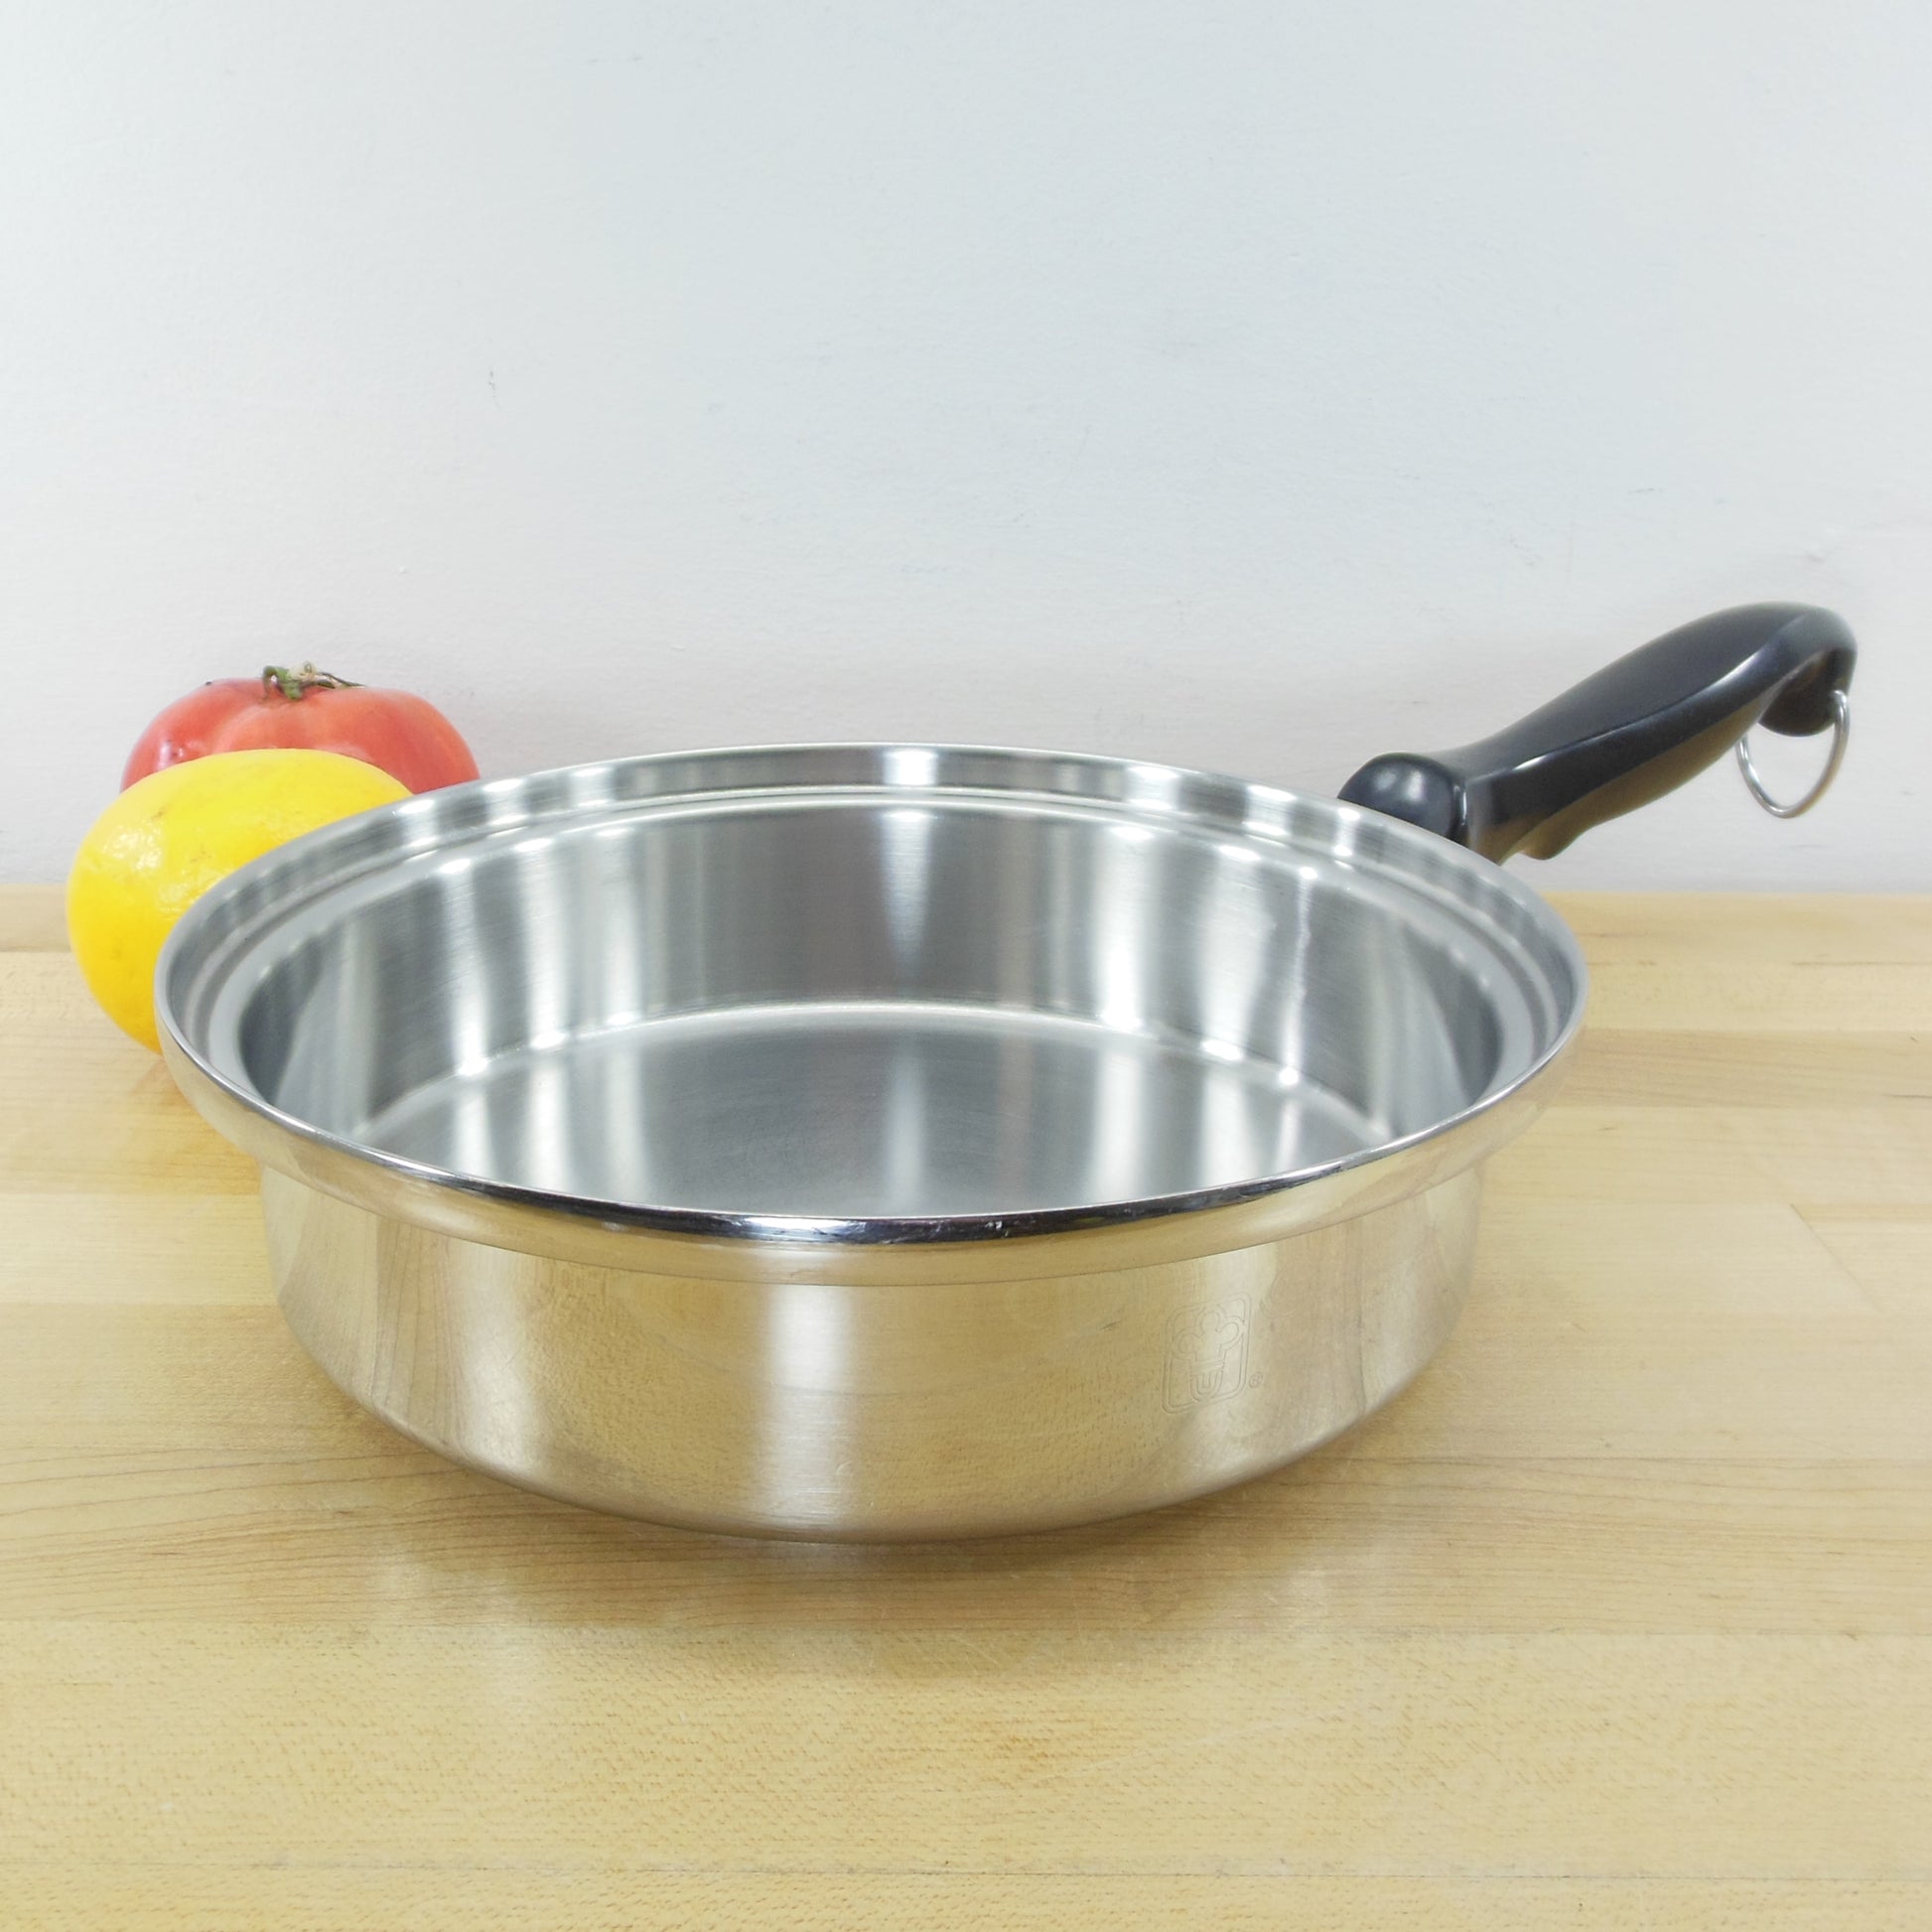 Townecraft Chef's Ware 8" 9" Open Skillet 5 Ply Stainless